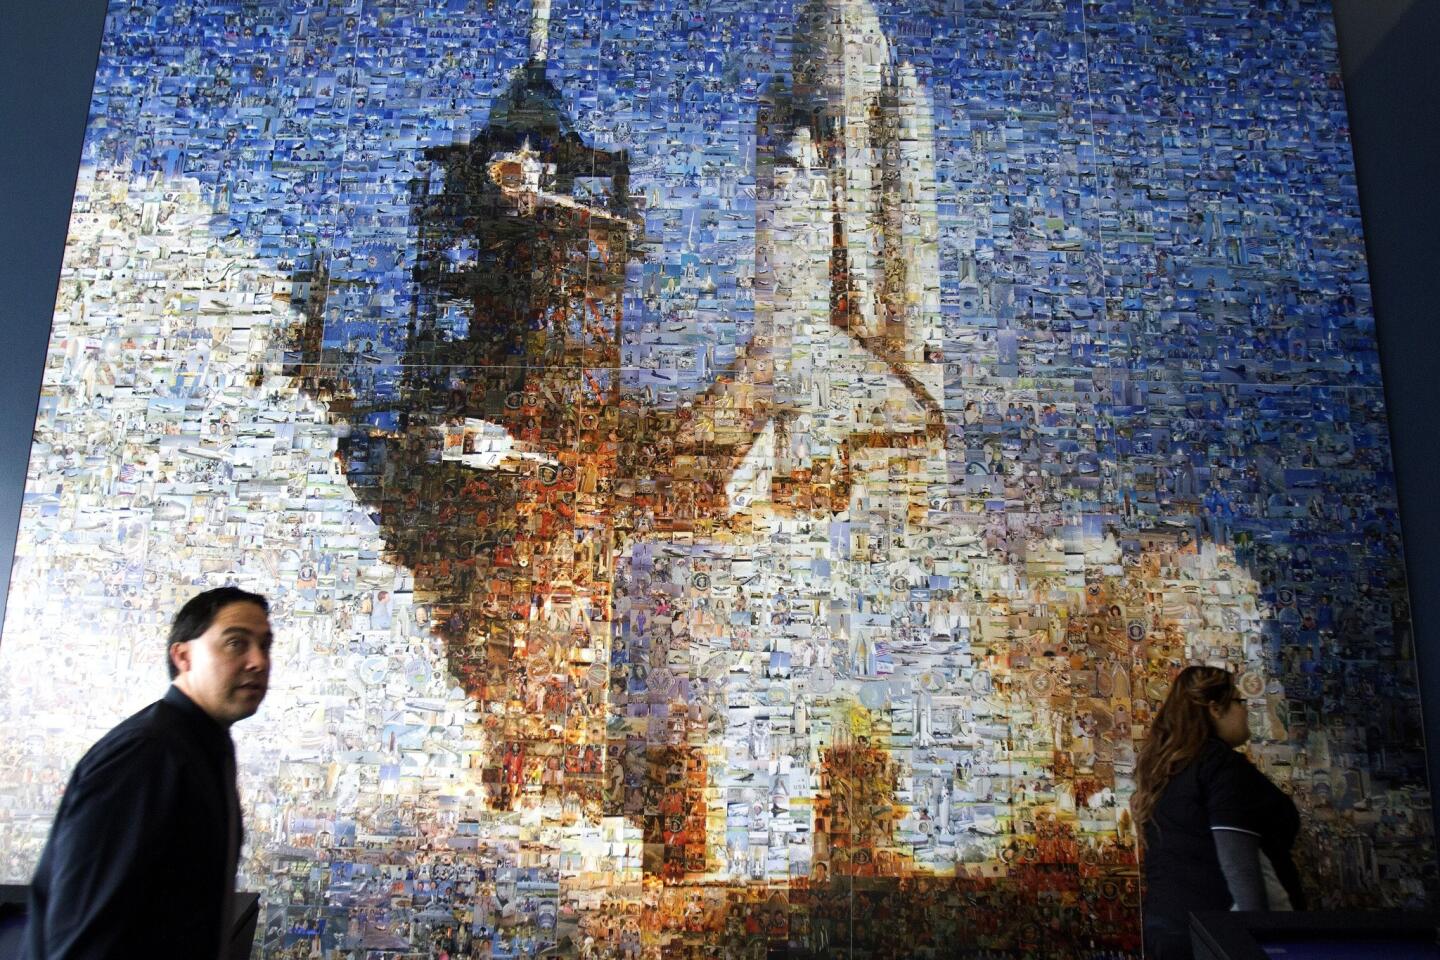 Mosaic of space shuttle Columbia